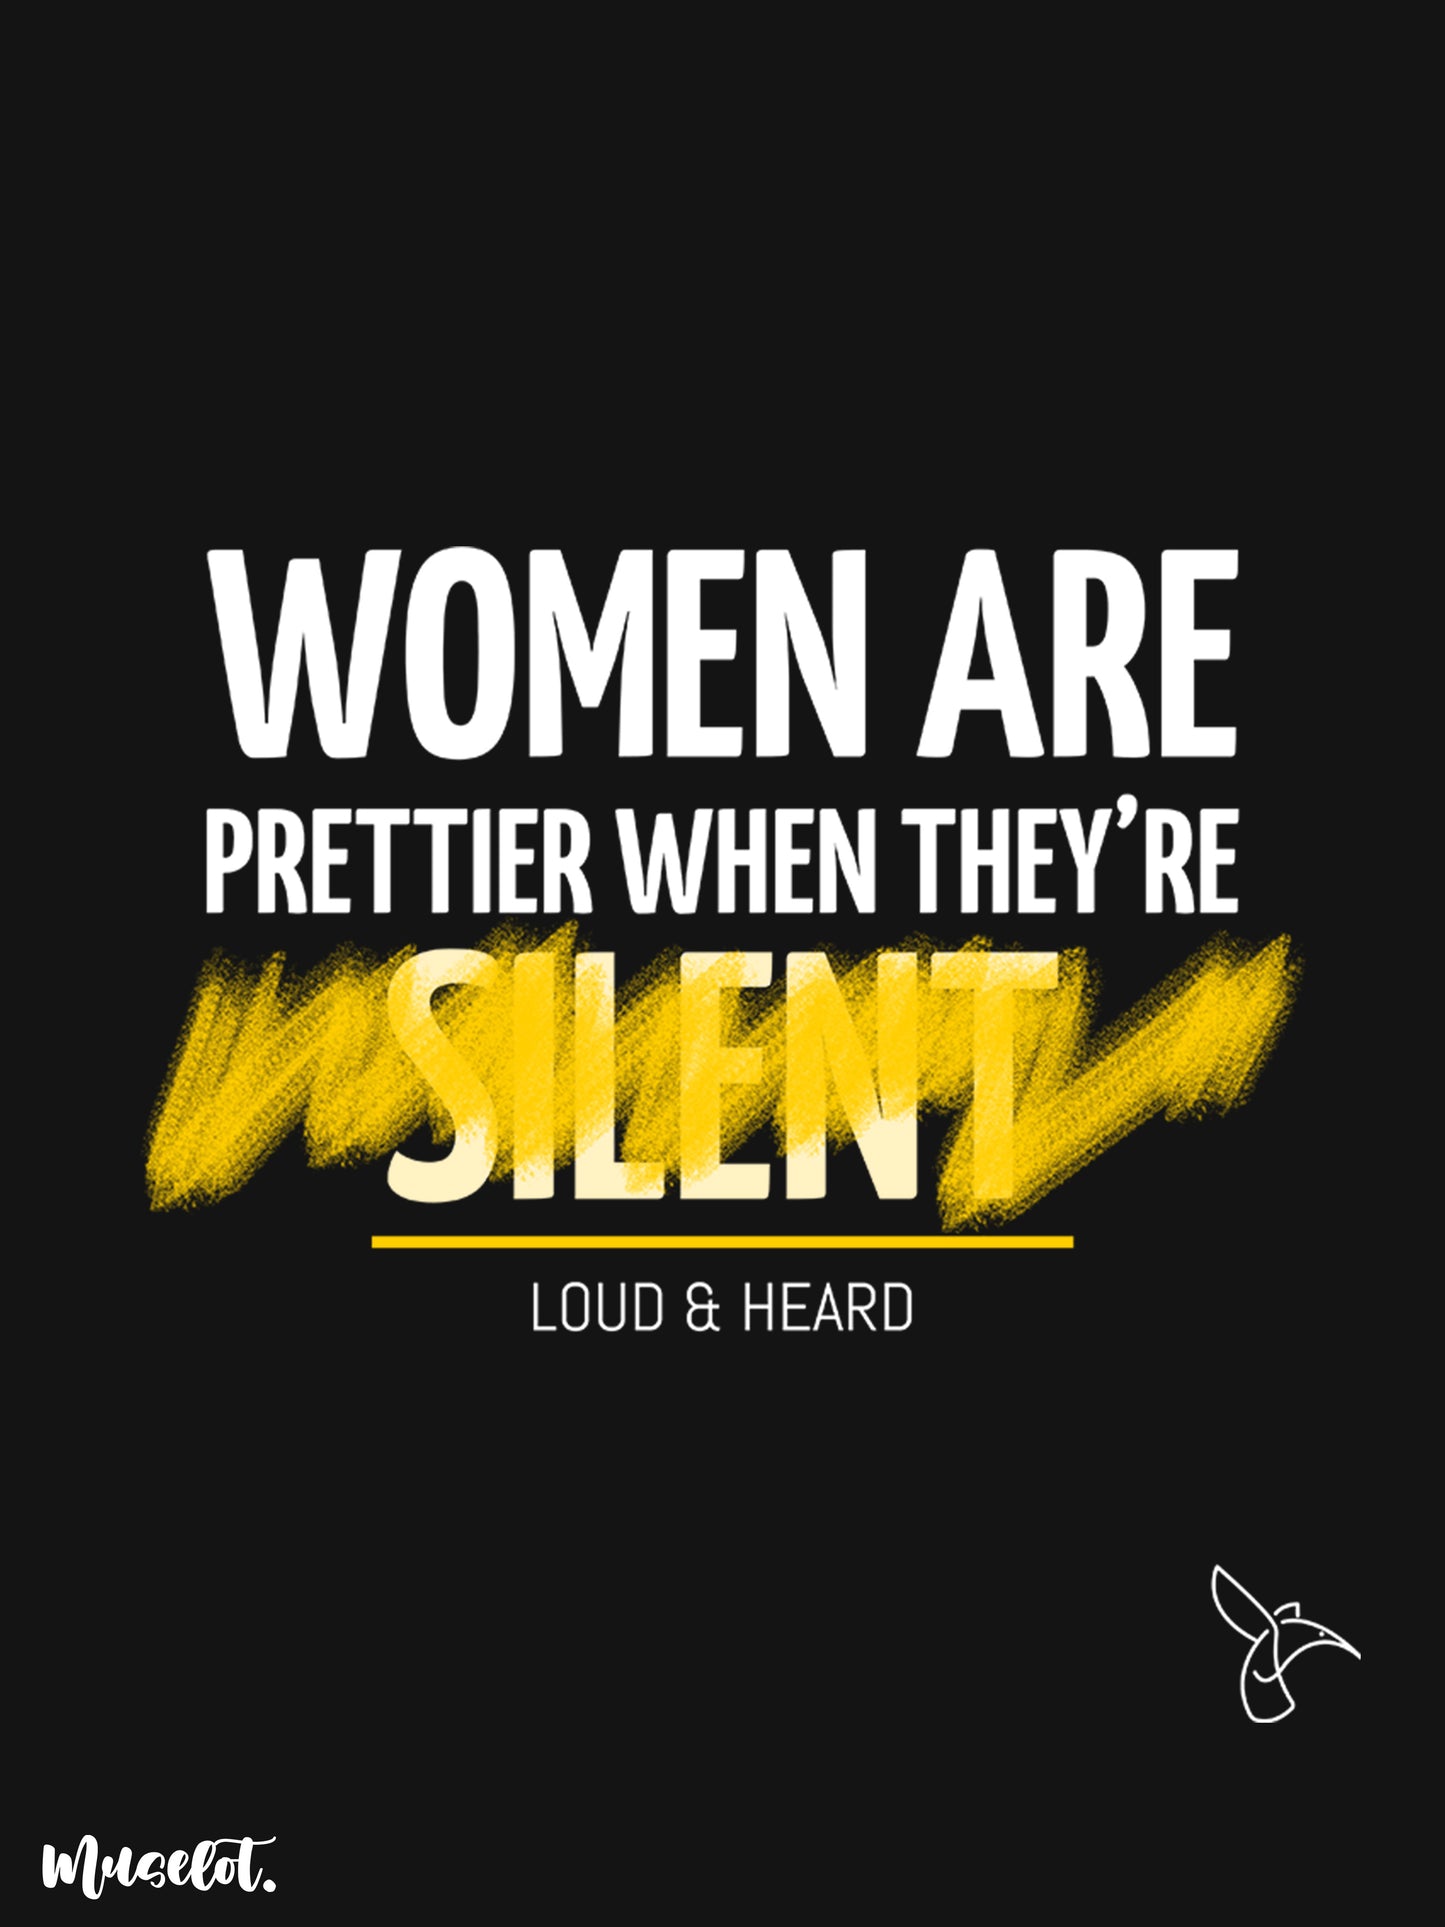 Woman are prettier when loud and heard cropped black t shirt for woman - Muselot